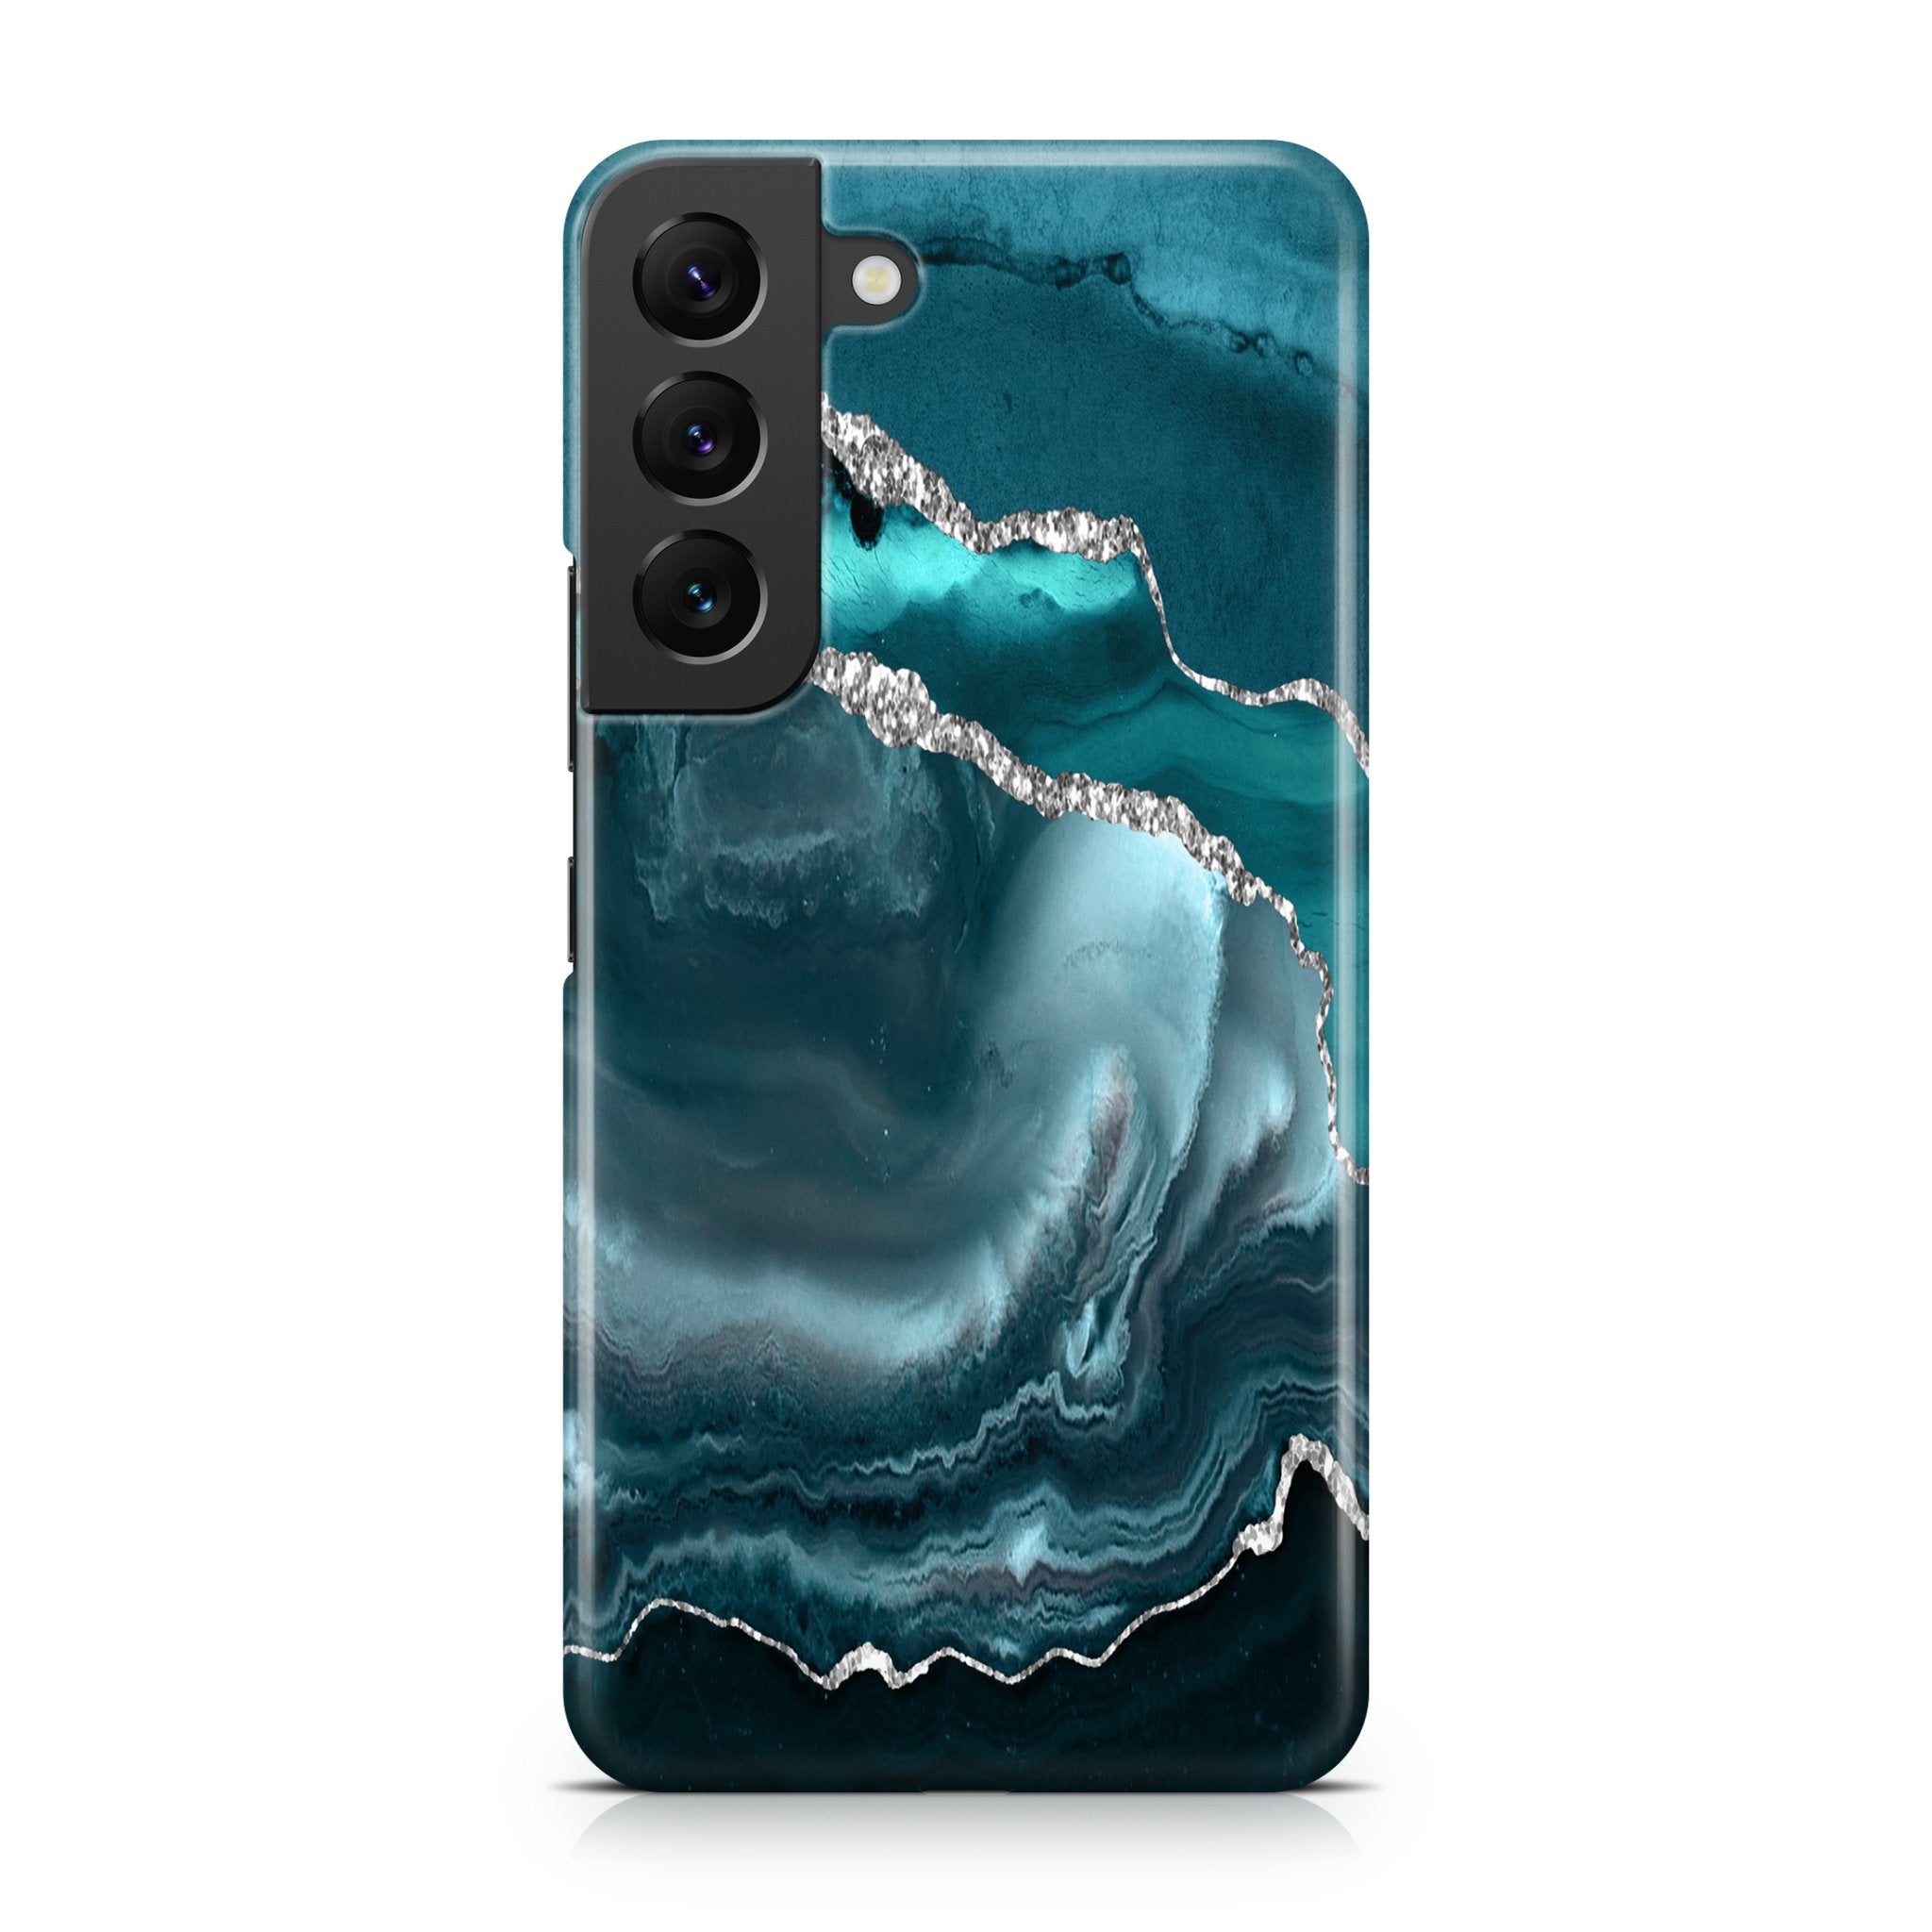 Teal Elegance III - Samsung phone case designs by CaseSwagger